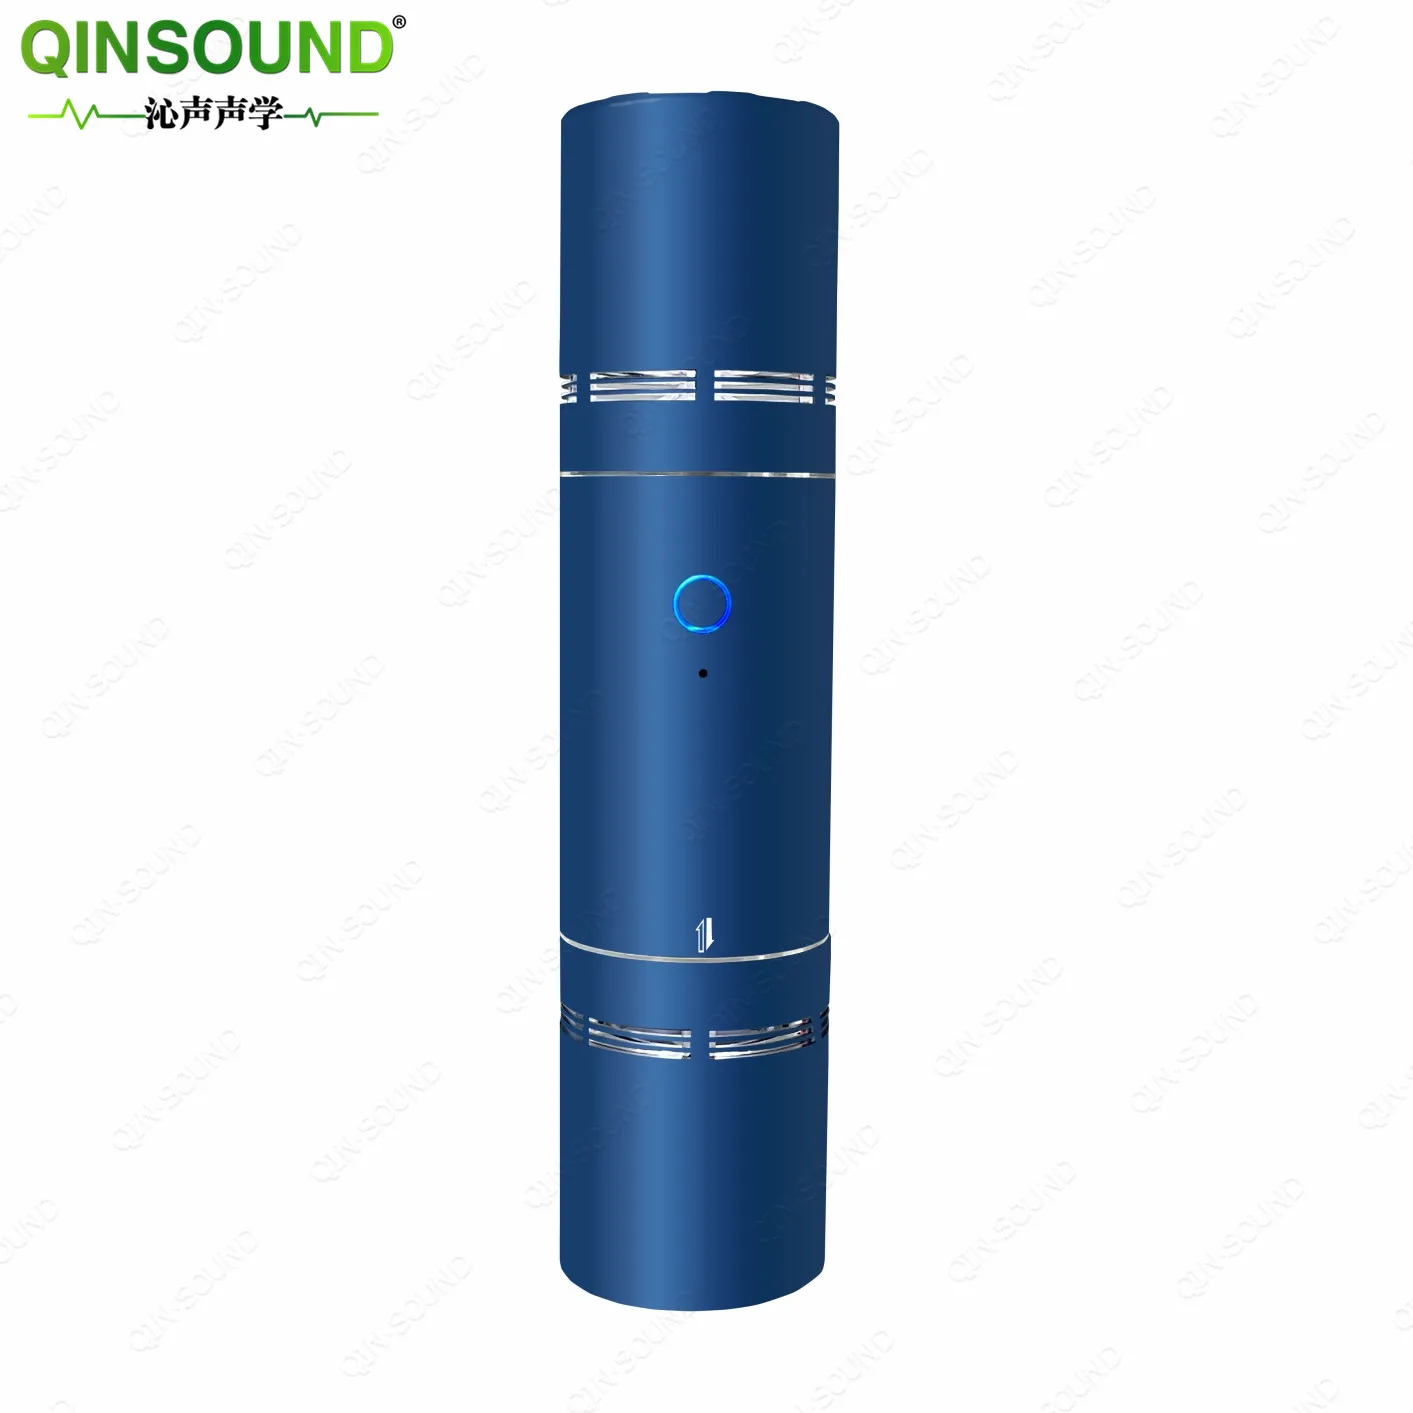 

Qinsound New arrival product Muti-function mini Speaker with Five Parts, Blue/ grey/ pink